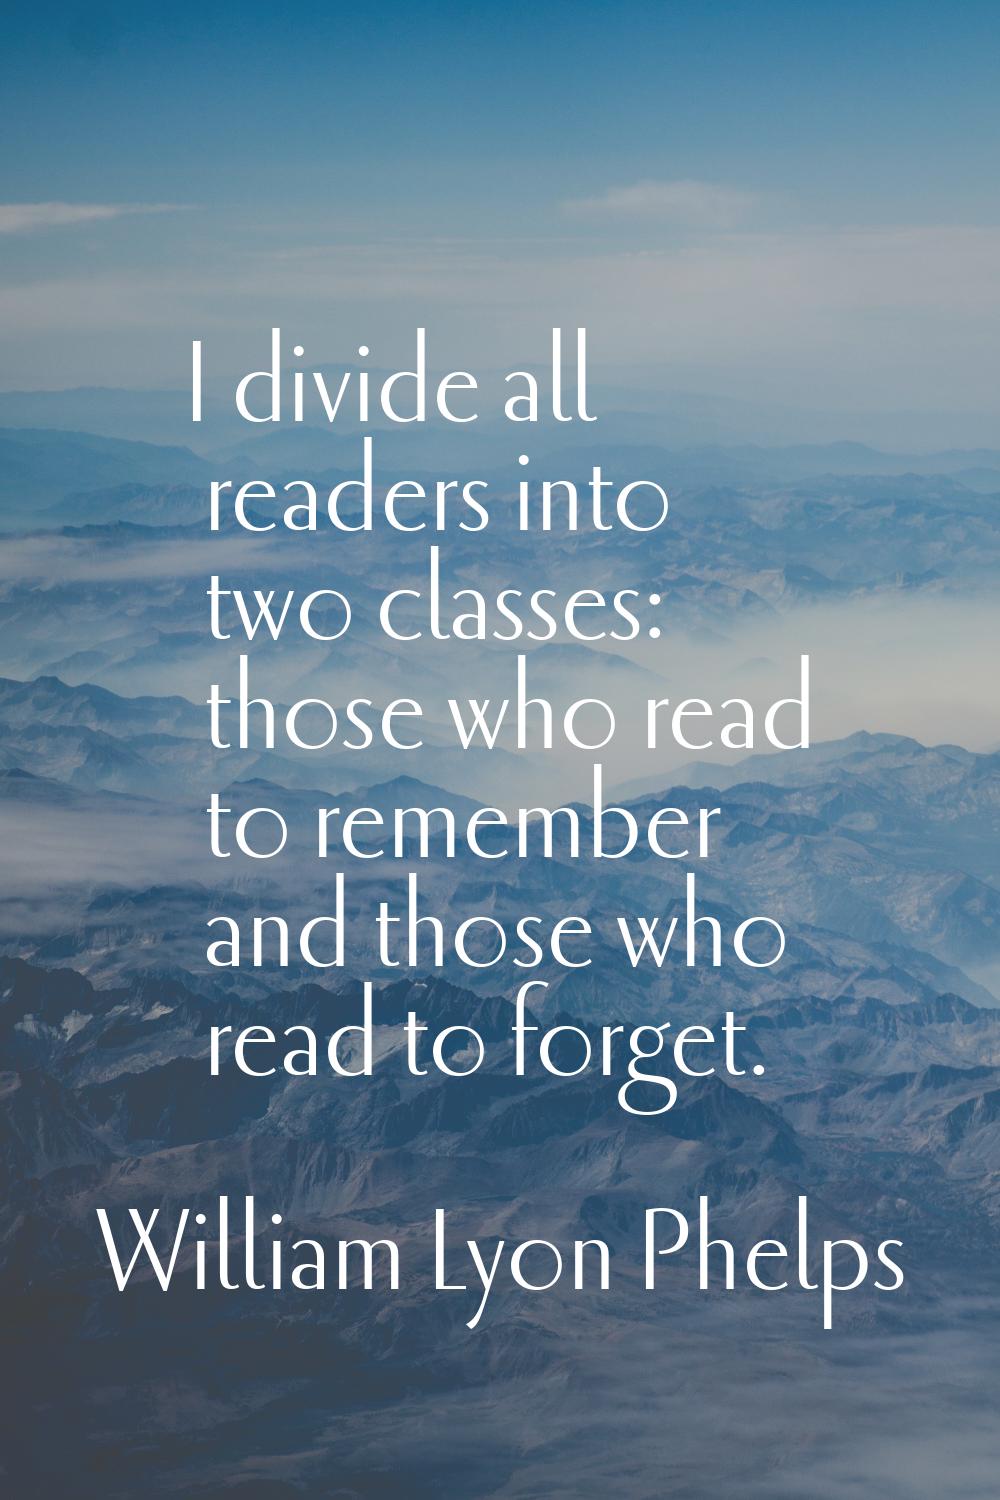 I divide all readers into two classes: those who read to remember and those who read to forget.